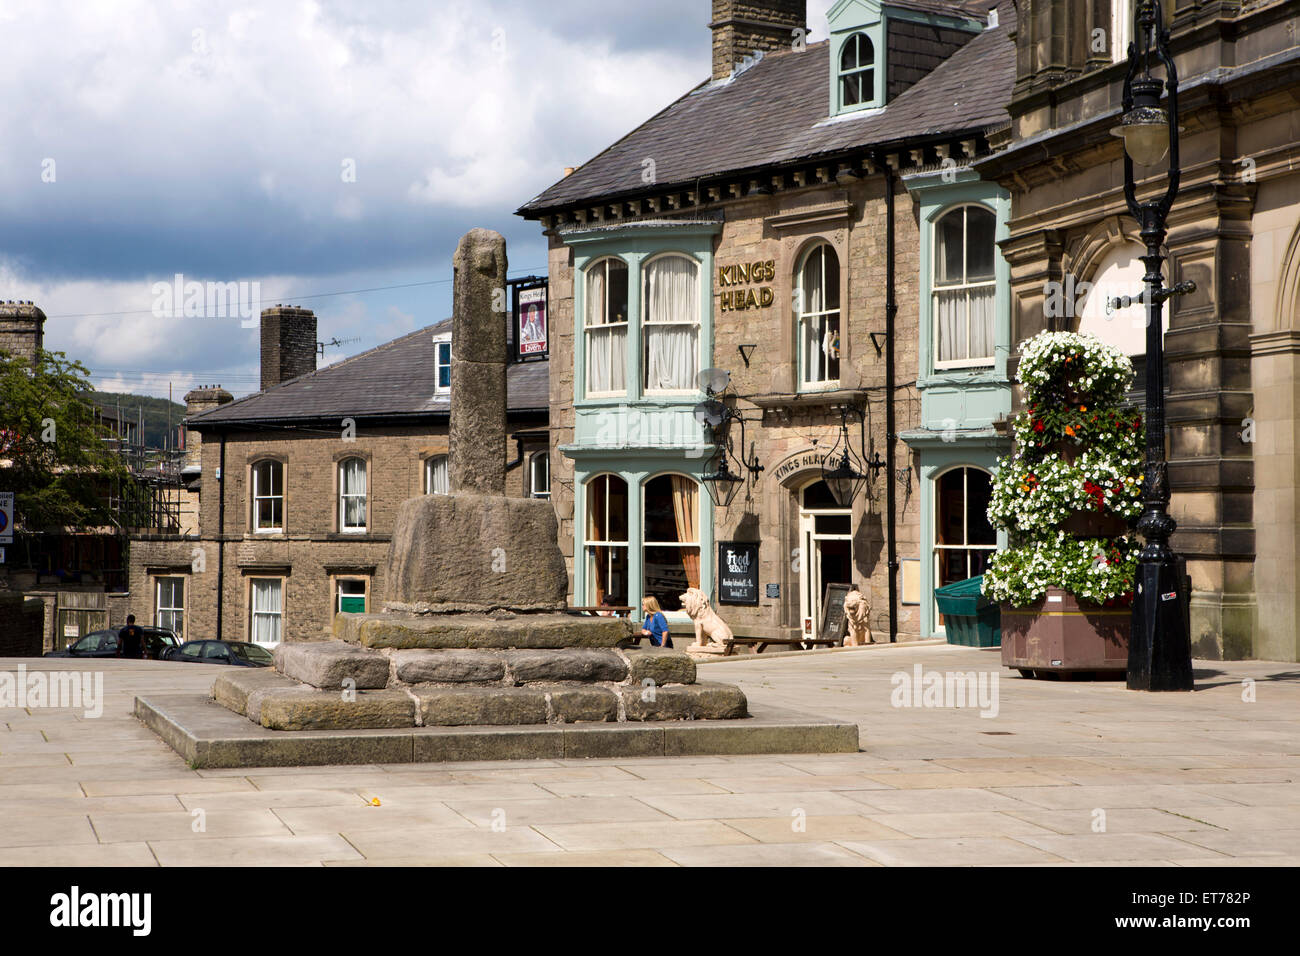 UK, England, Derbyshire, Buxton, Market Place, old cross outside Town Hall and Kings Head pub Stock Photo